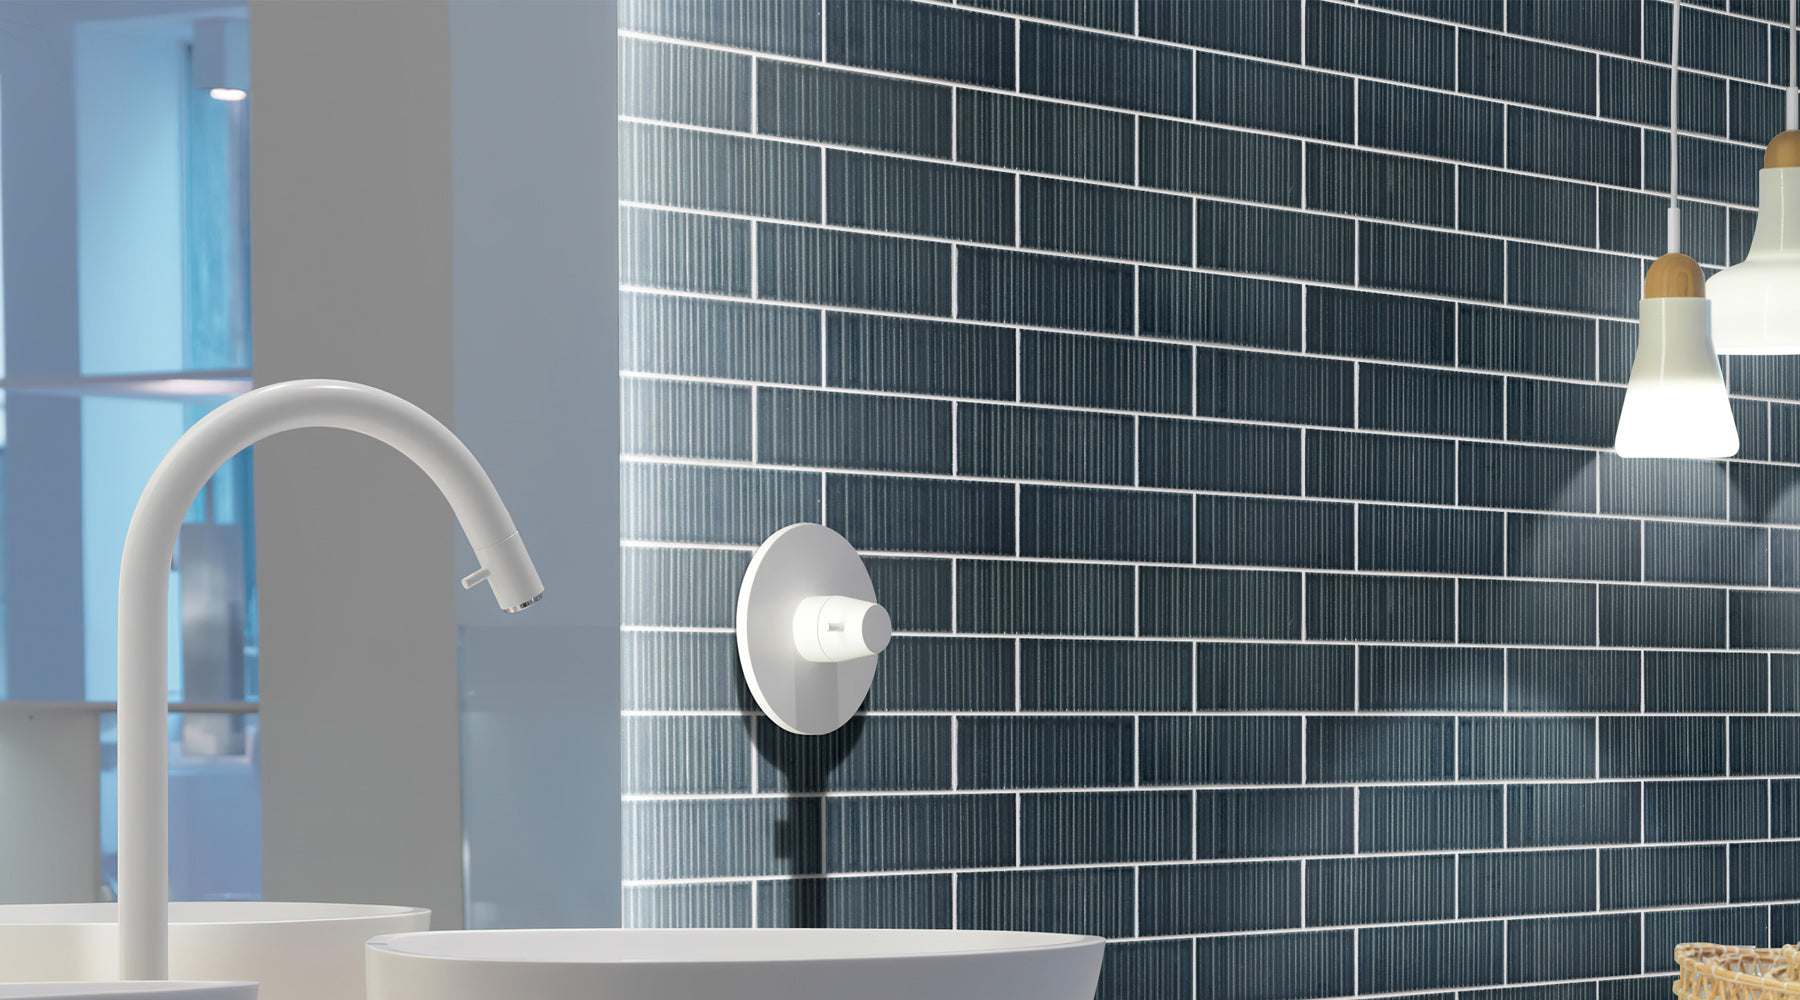 An image of a white faucet and sink in the left foreground and blue tile on the wall in the background.